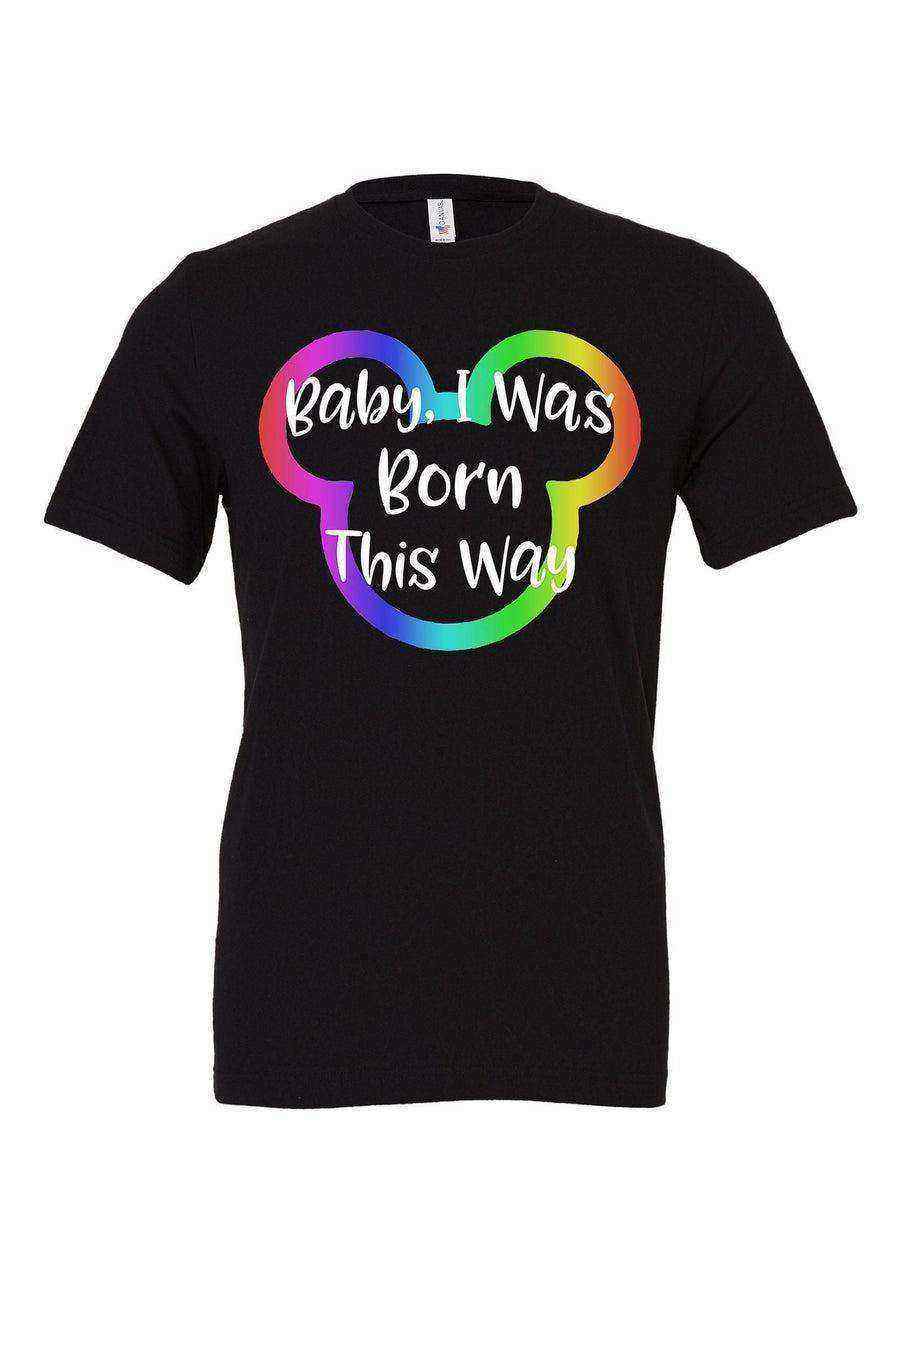 Baby I Was Born This Way Tee - Dylan's Tees